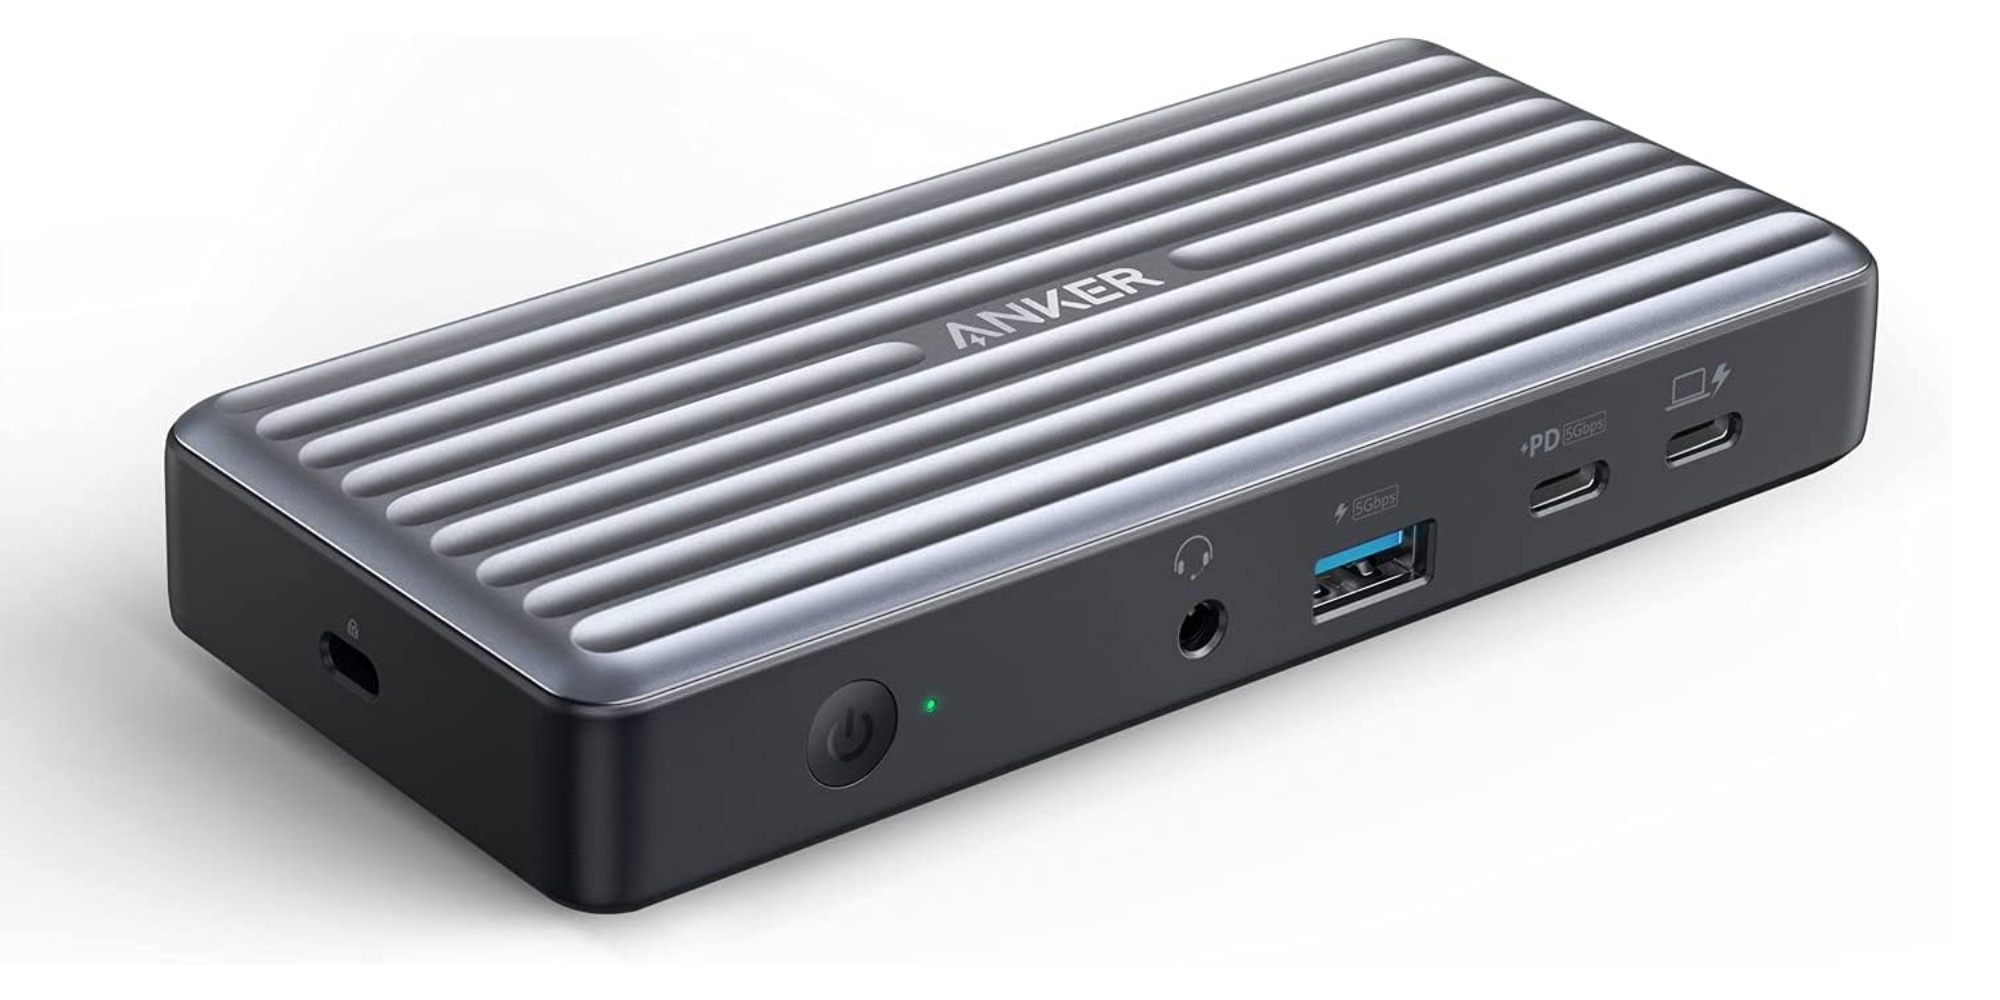 Anker PowerWave 9-in-1 dock arrives with 60W passthrough - 9to5Toys